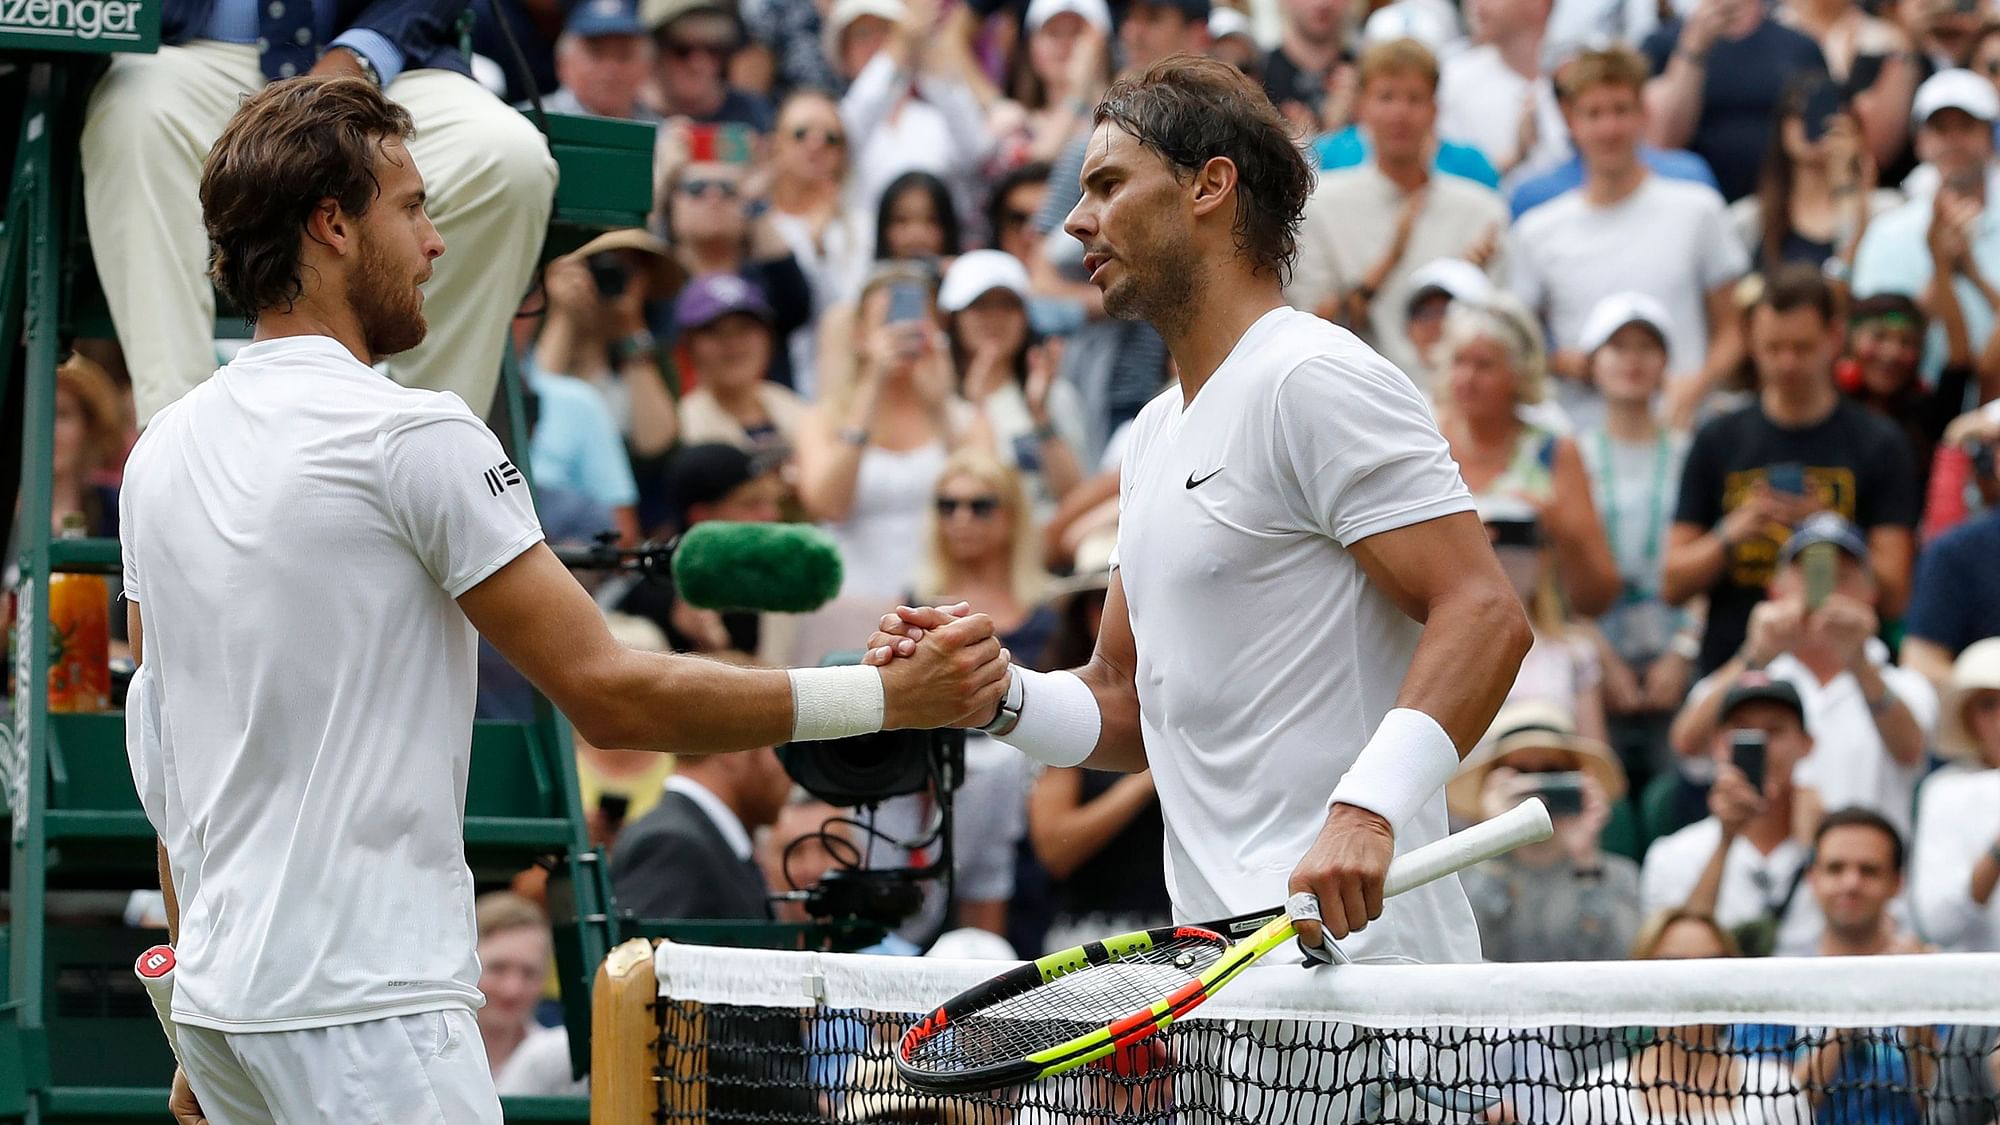  Rafael Nadal (R), greets Joao Sousa at the net after beating him in a Men’s singles match at the Wimbledon Tennis Championships.